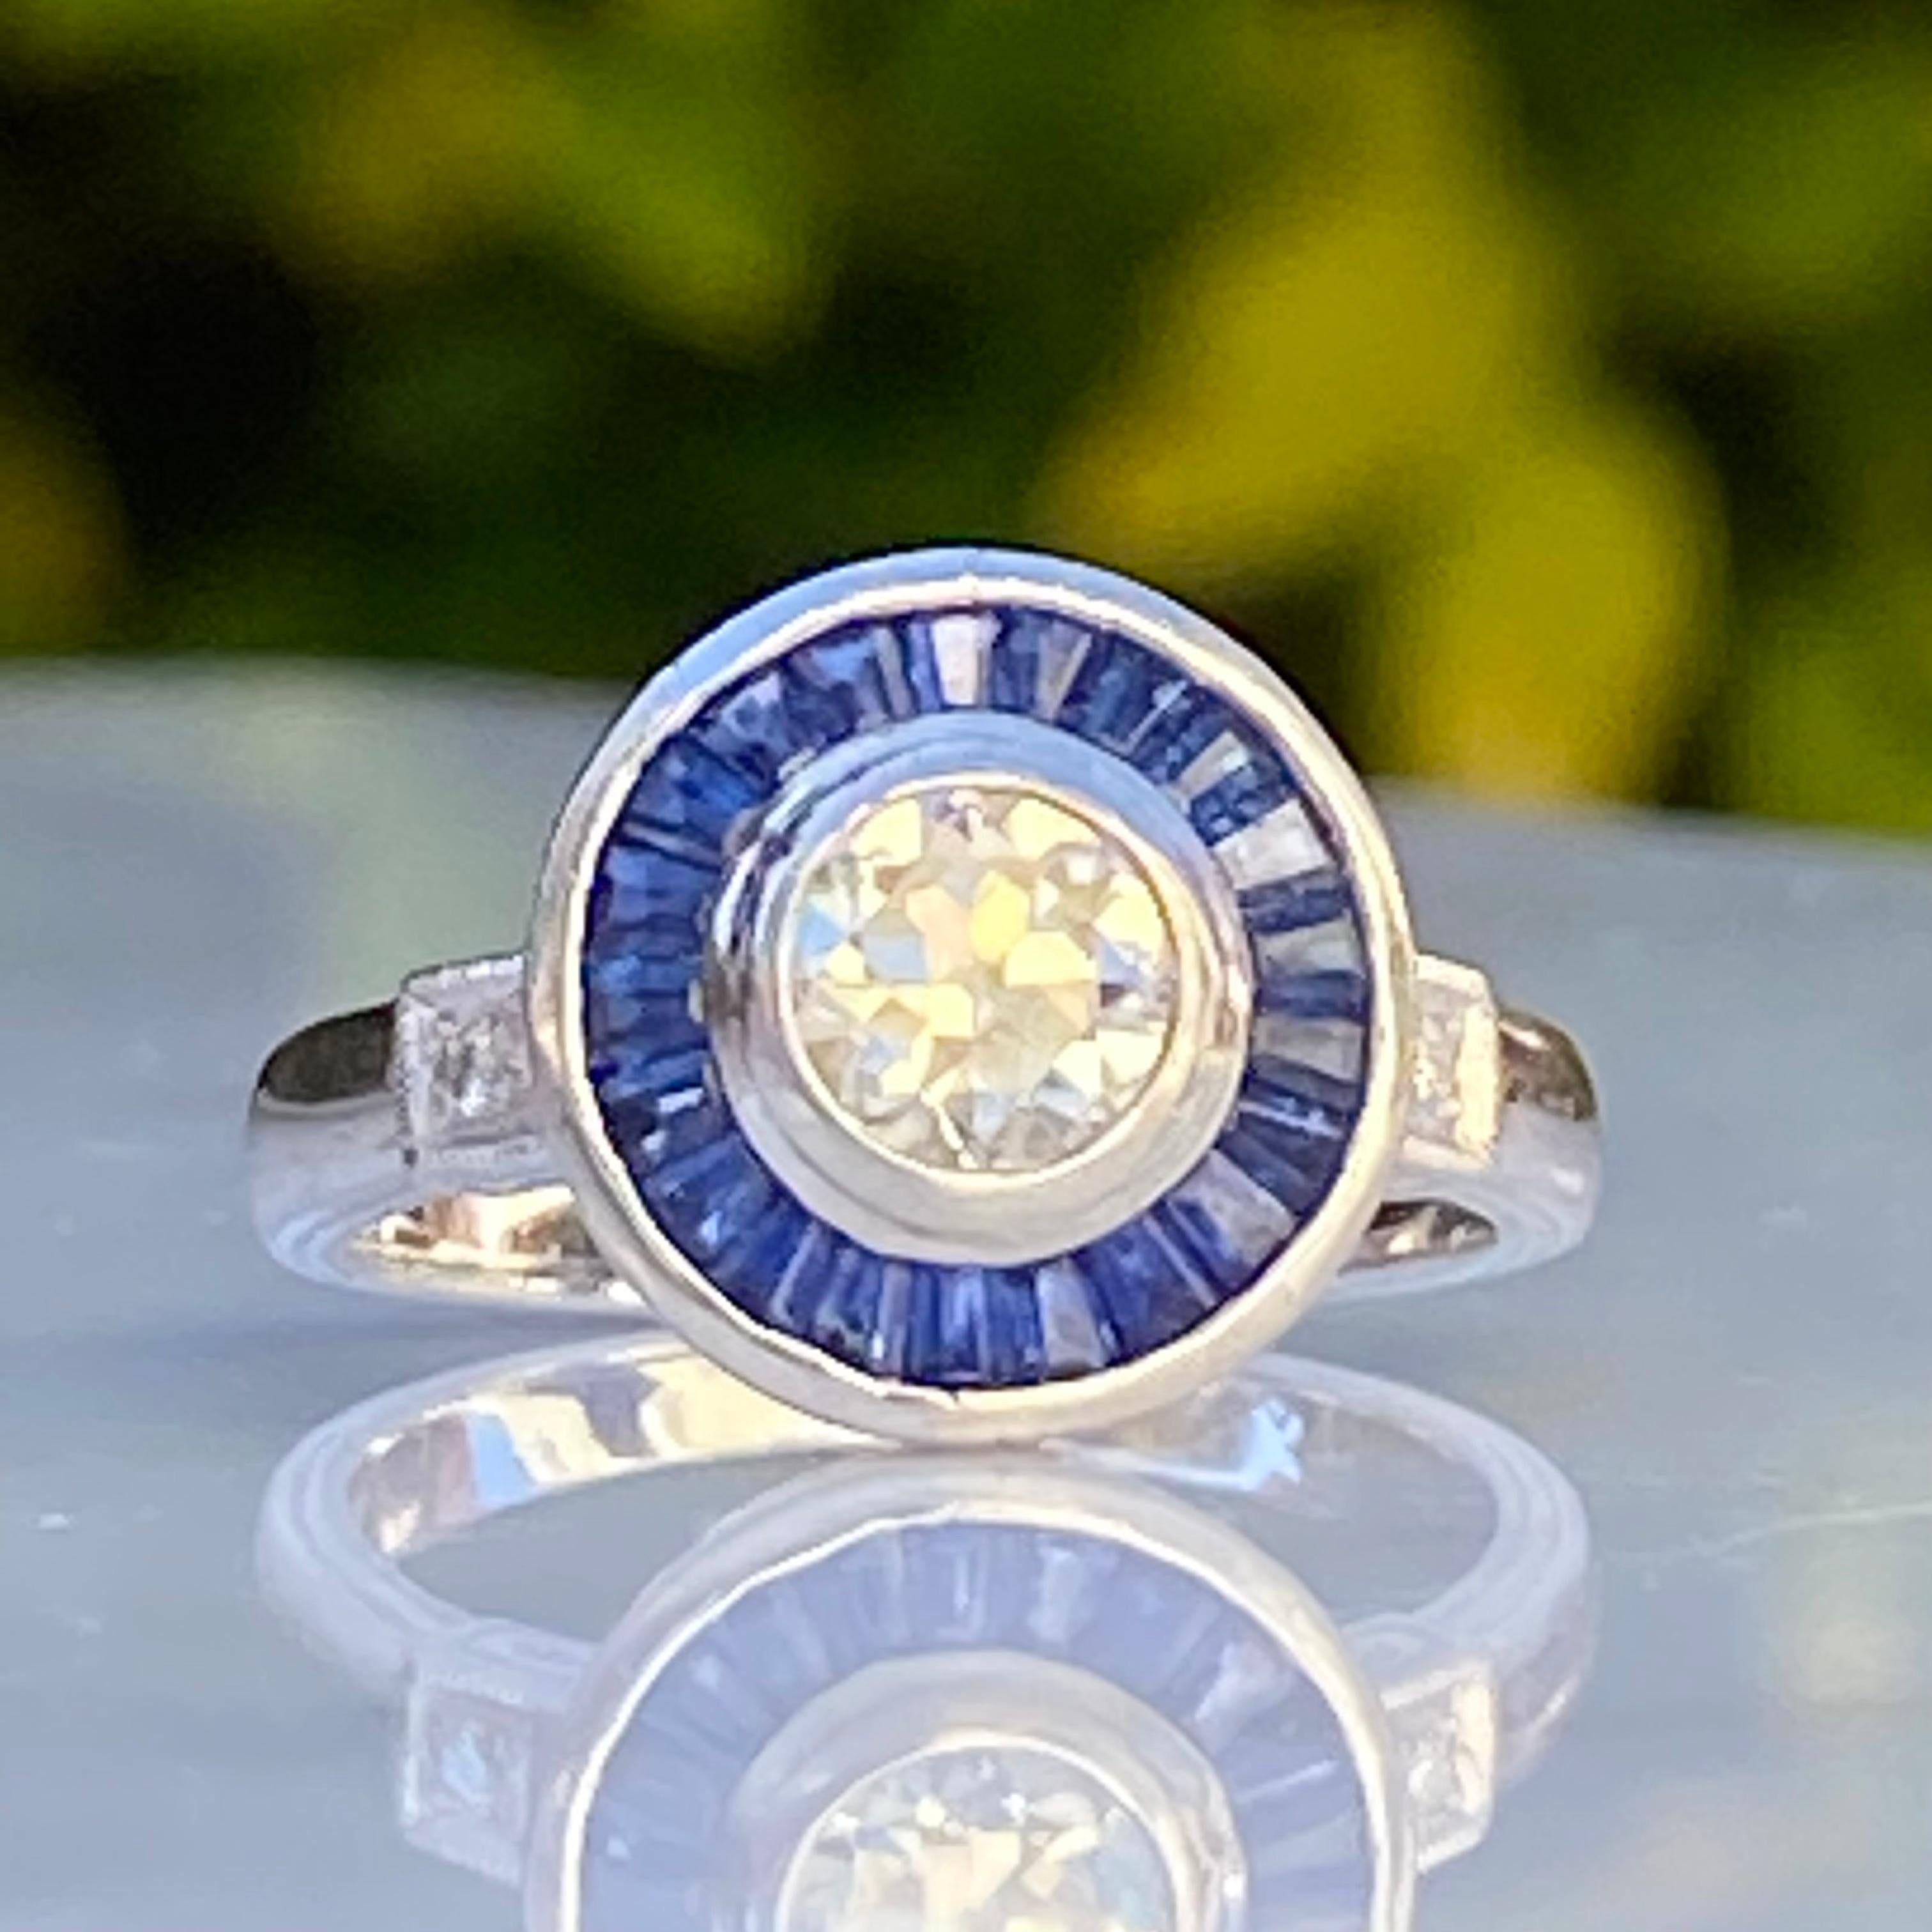 Details:
Stunning vintage Art Deco style .73 carat Old European Cut diamond & 1 carat sapphire engagement ring. The band is platinum. This is a gorgeous ring with lovely engraving around the shoulders of the band, and has engraving details